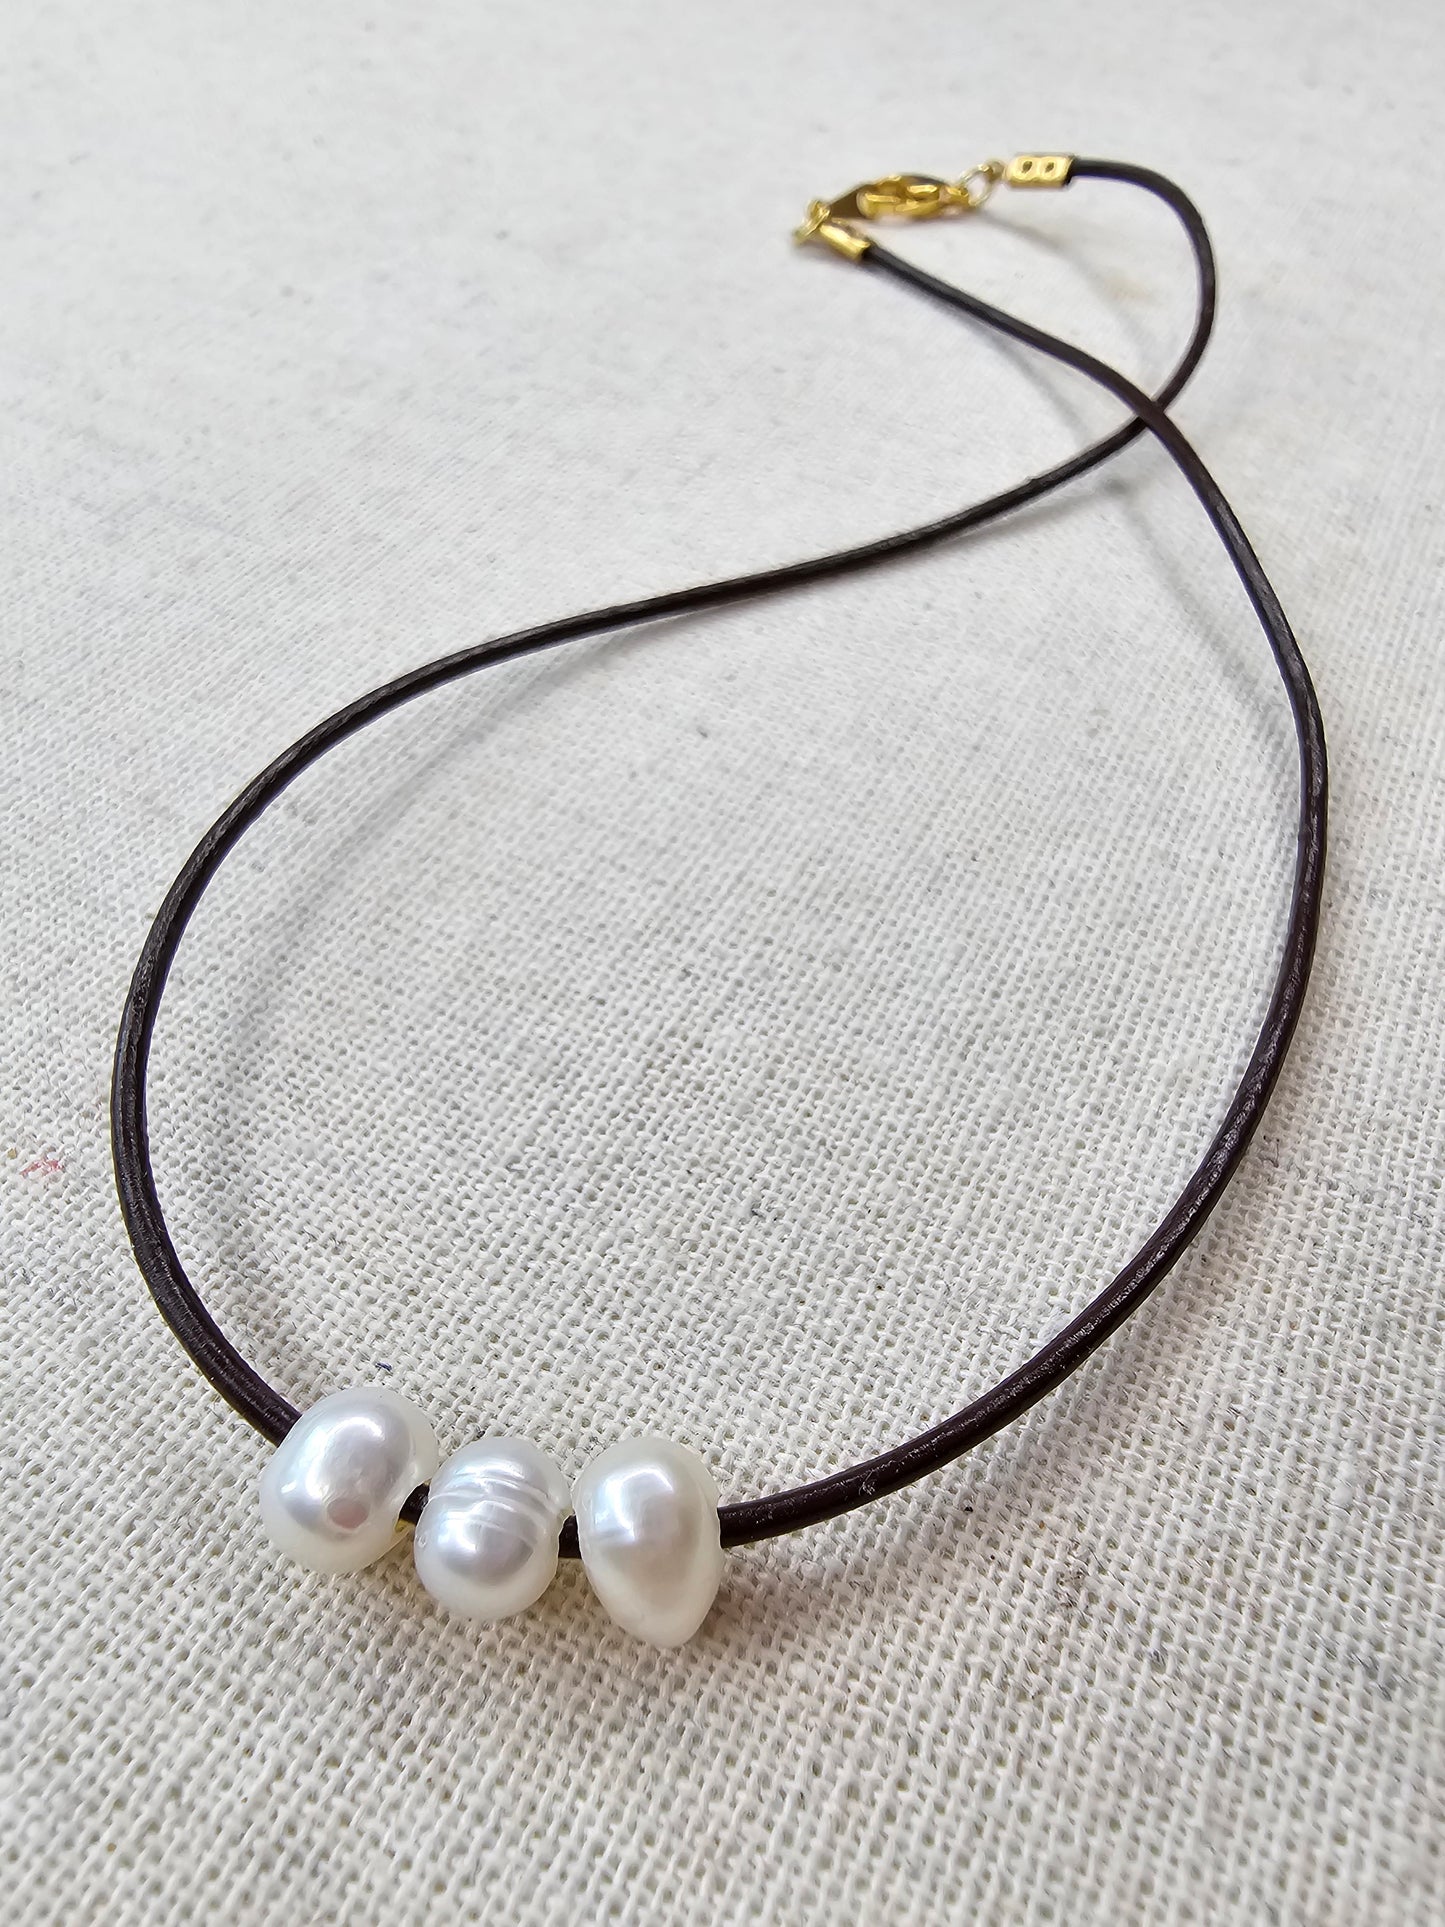 Three Pearls Leather Necklace